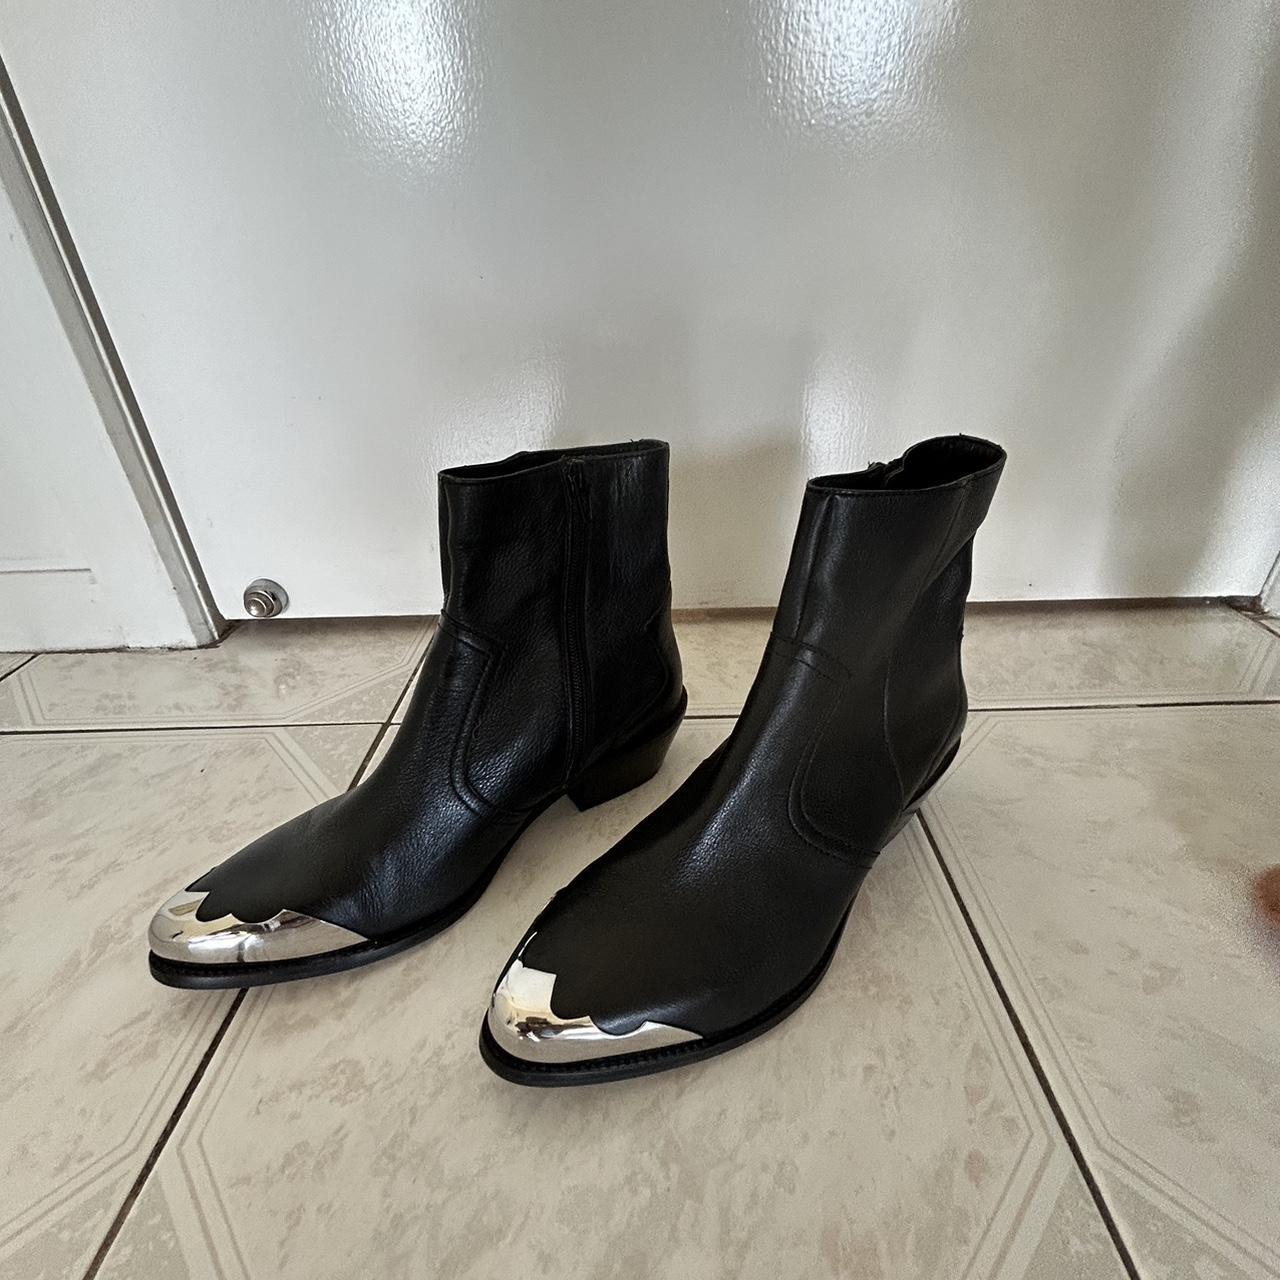 Western style zip up boot with metal accents. Worn a... - Depop